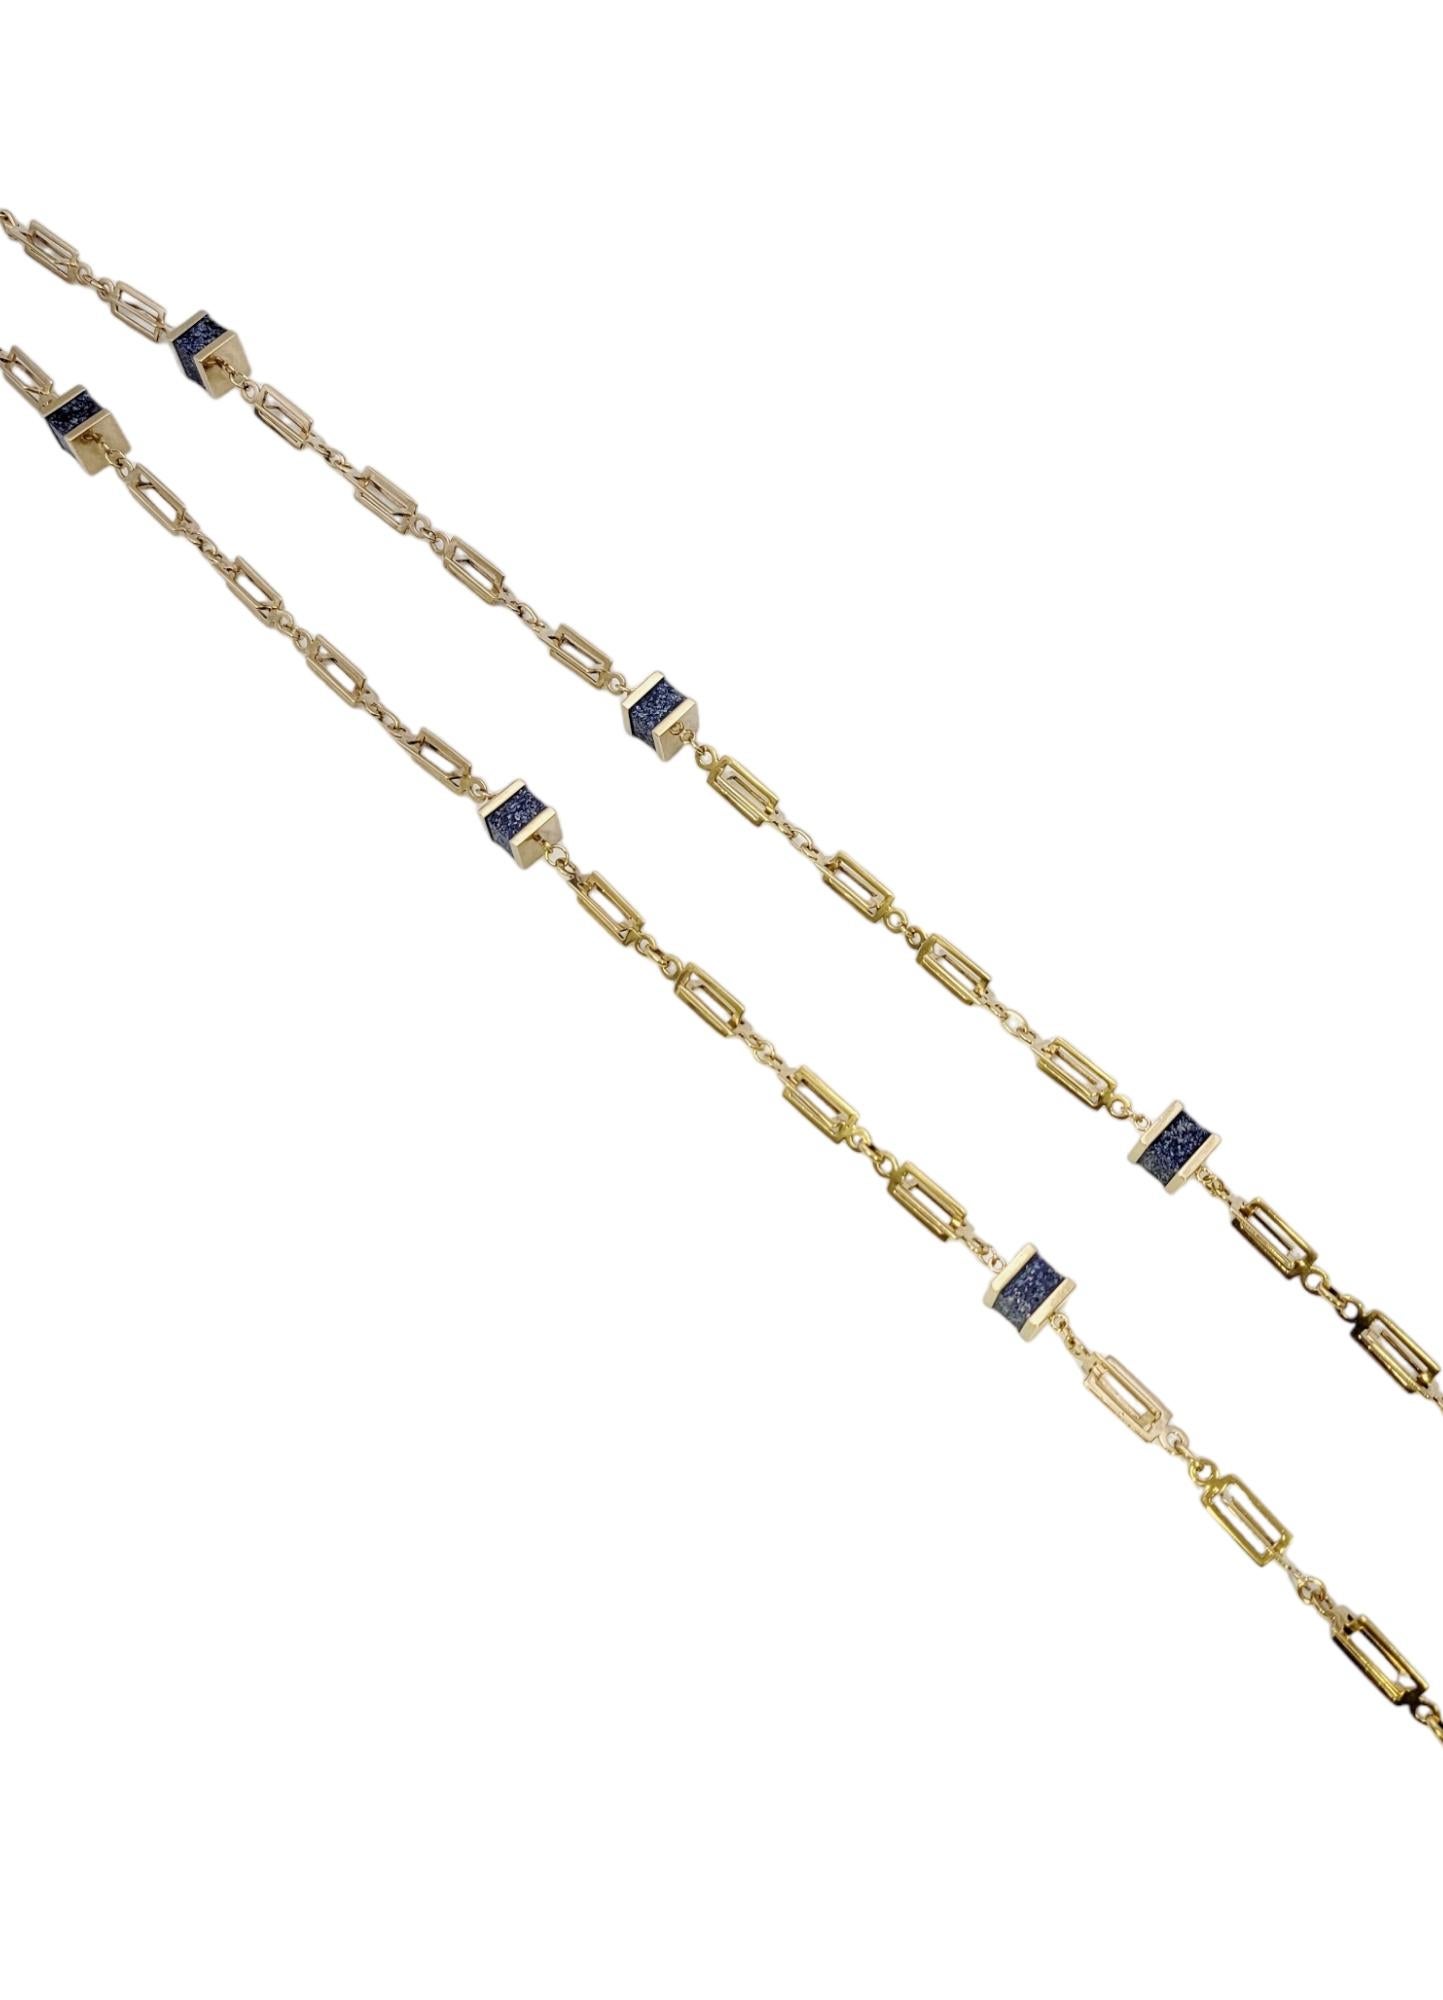 Contemporary Square Lapis Lazuli Station Necklace with 14 Karat Yellow Gold Chain For Sale